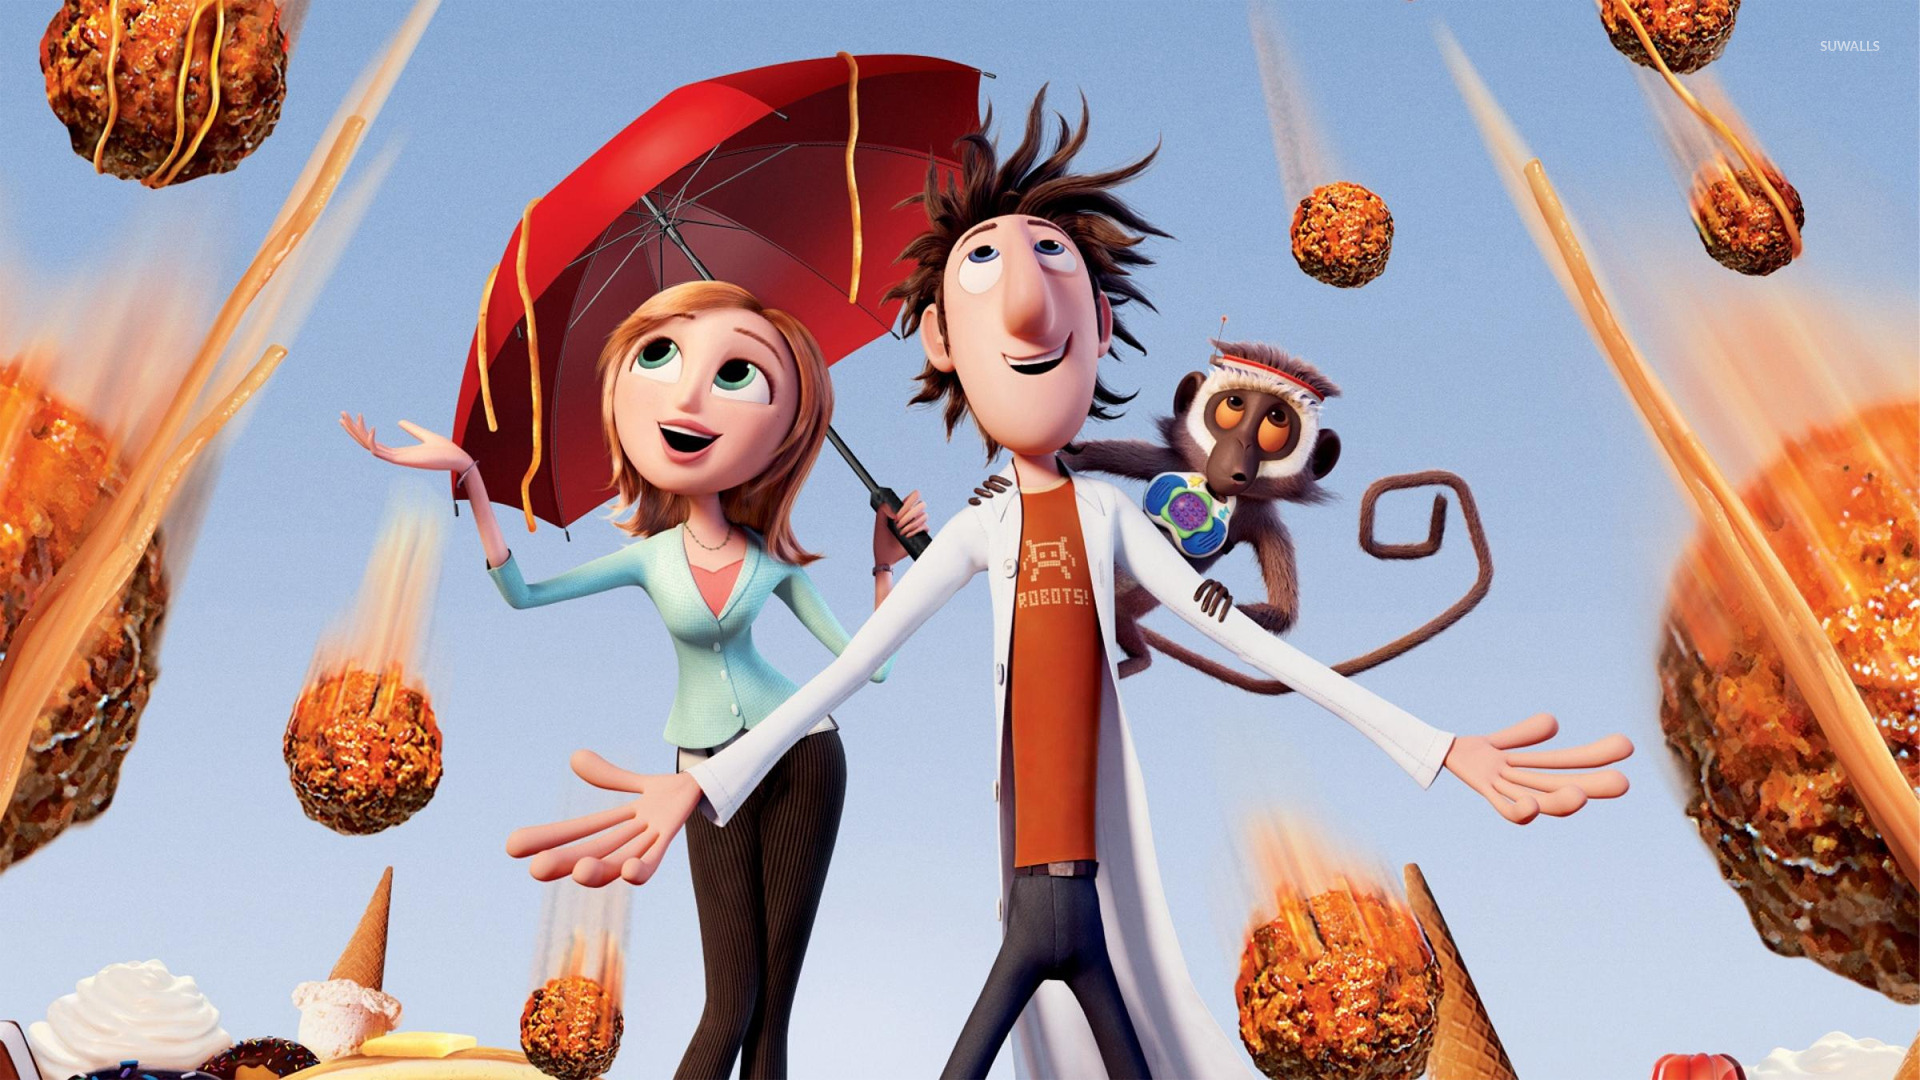 Cloudy With A Chance Of Meatballs Wallpaper Cartoon